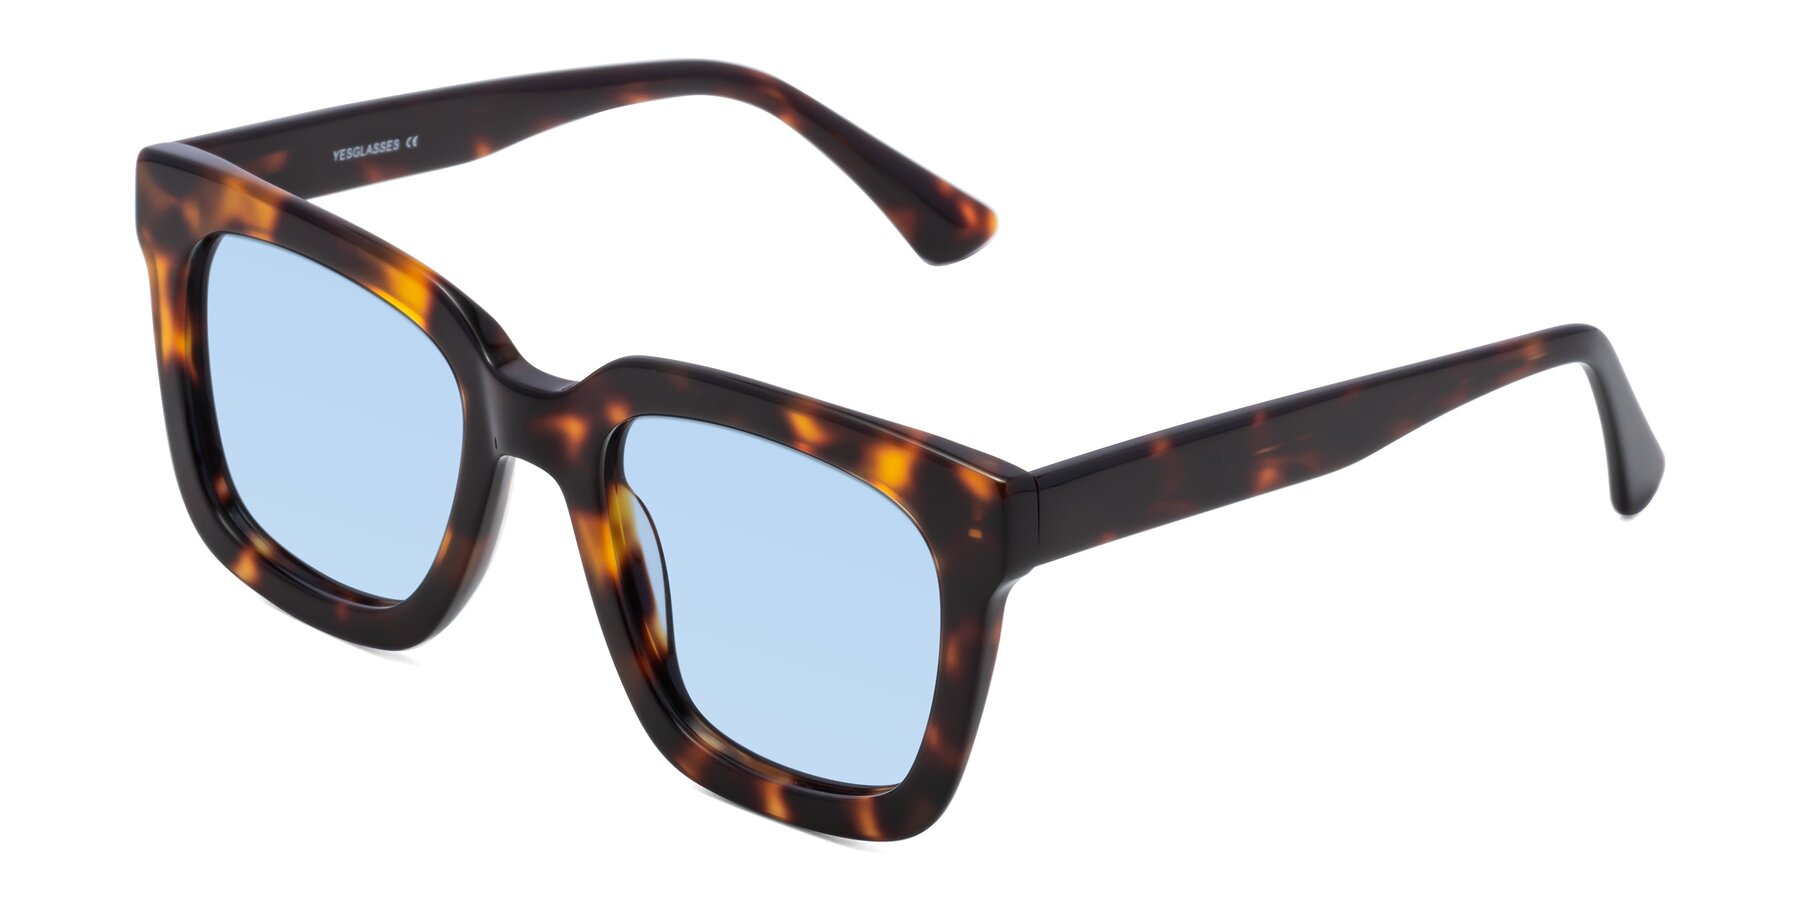 Angle of Parr in Tortoise with Light Blue Tinted Lenses